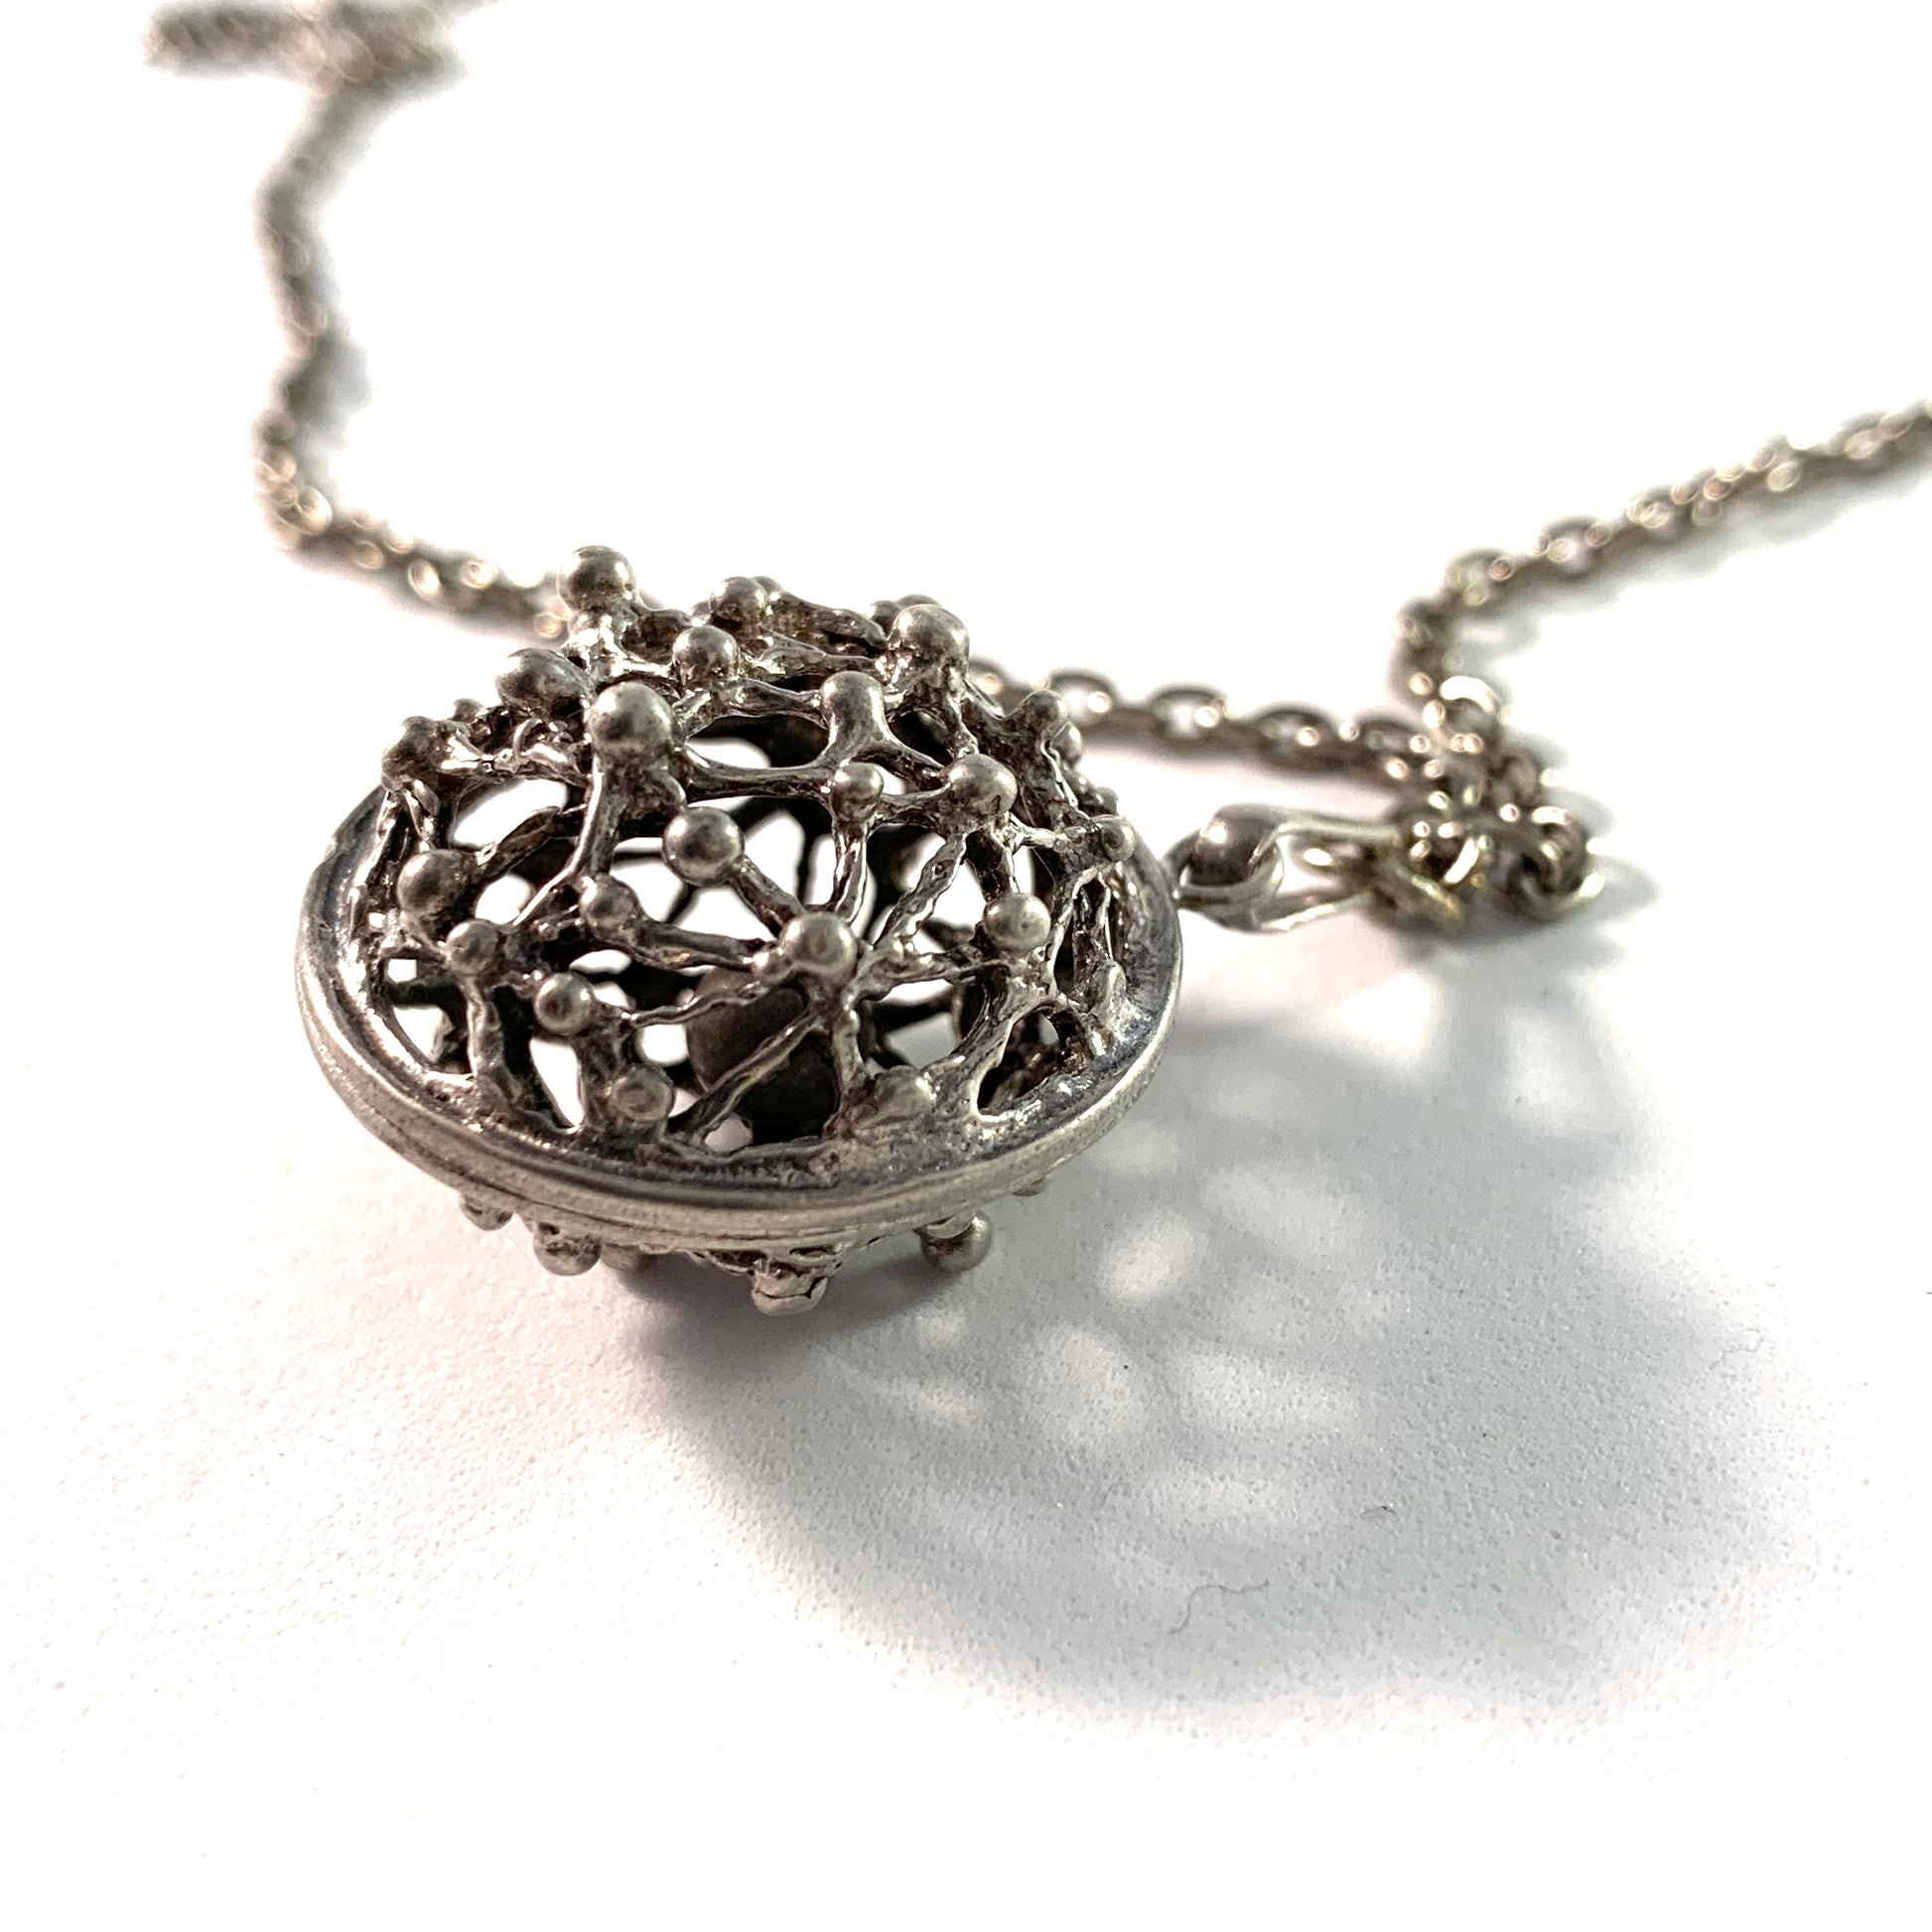 Vintage Sterling Pregnancy Harmony Ball Pendant Necklace